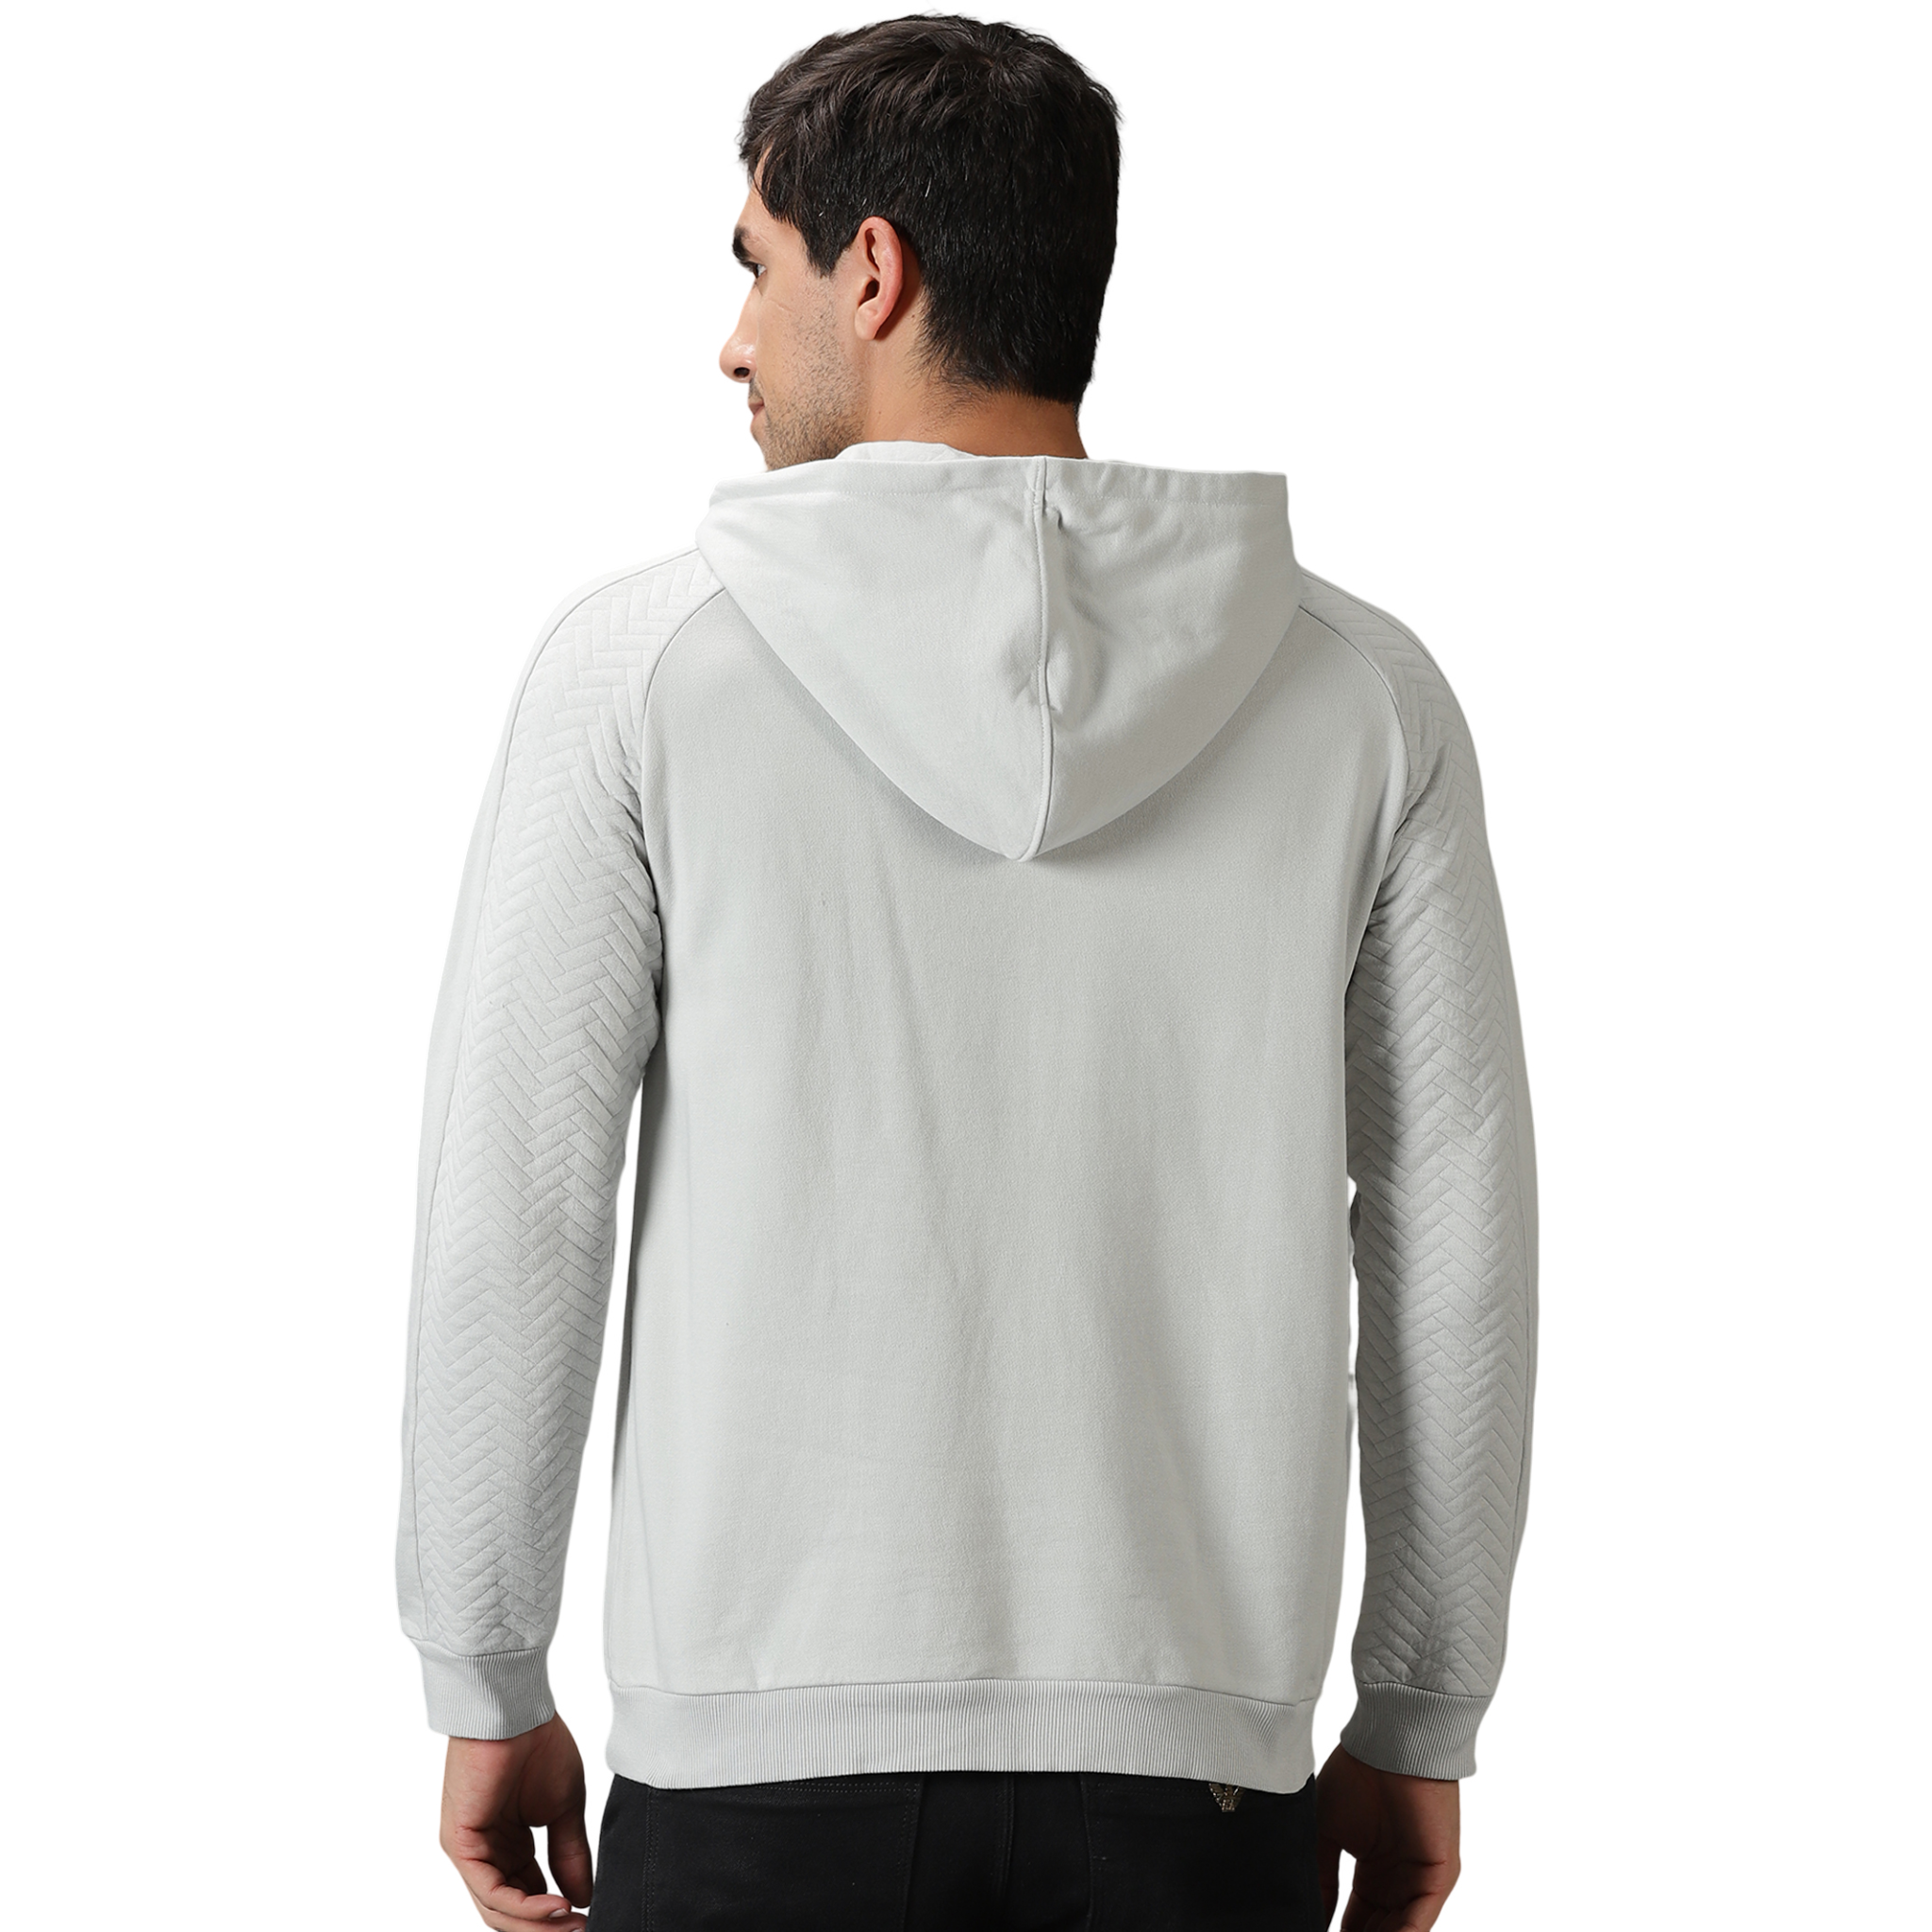 Men's Quilted Hooded Sweat Shirt with Kangaroo Pockets.